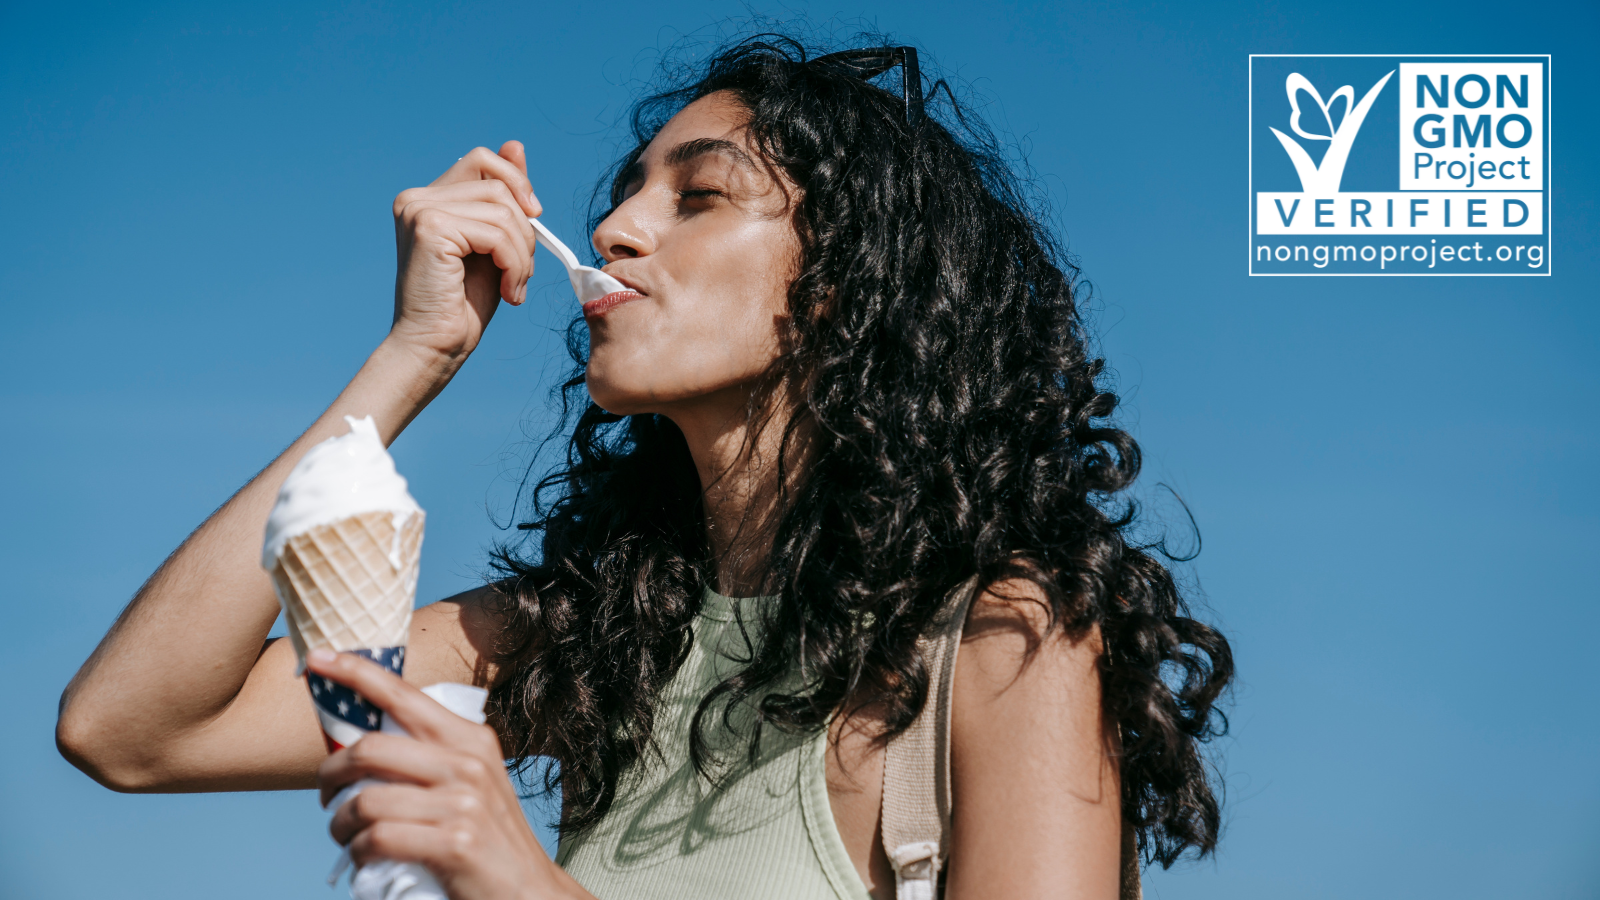 Curly hair woman of color eating ice cream from a spoon while holding ice cream cone